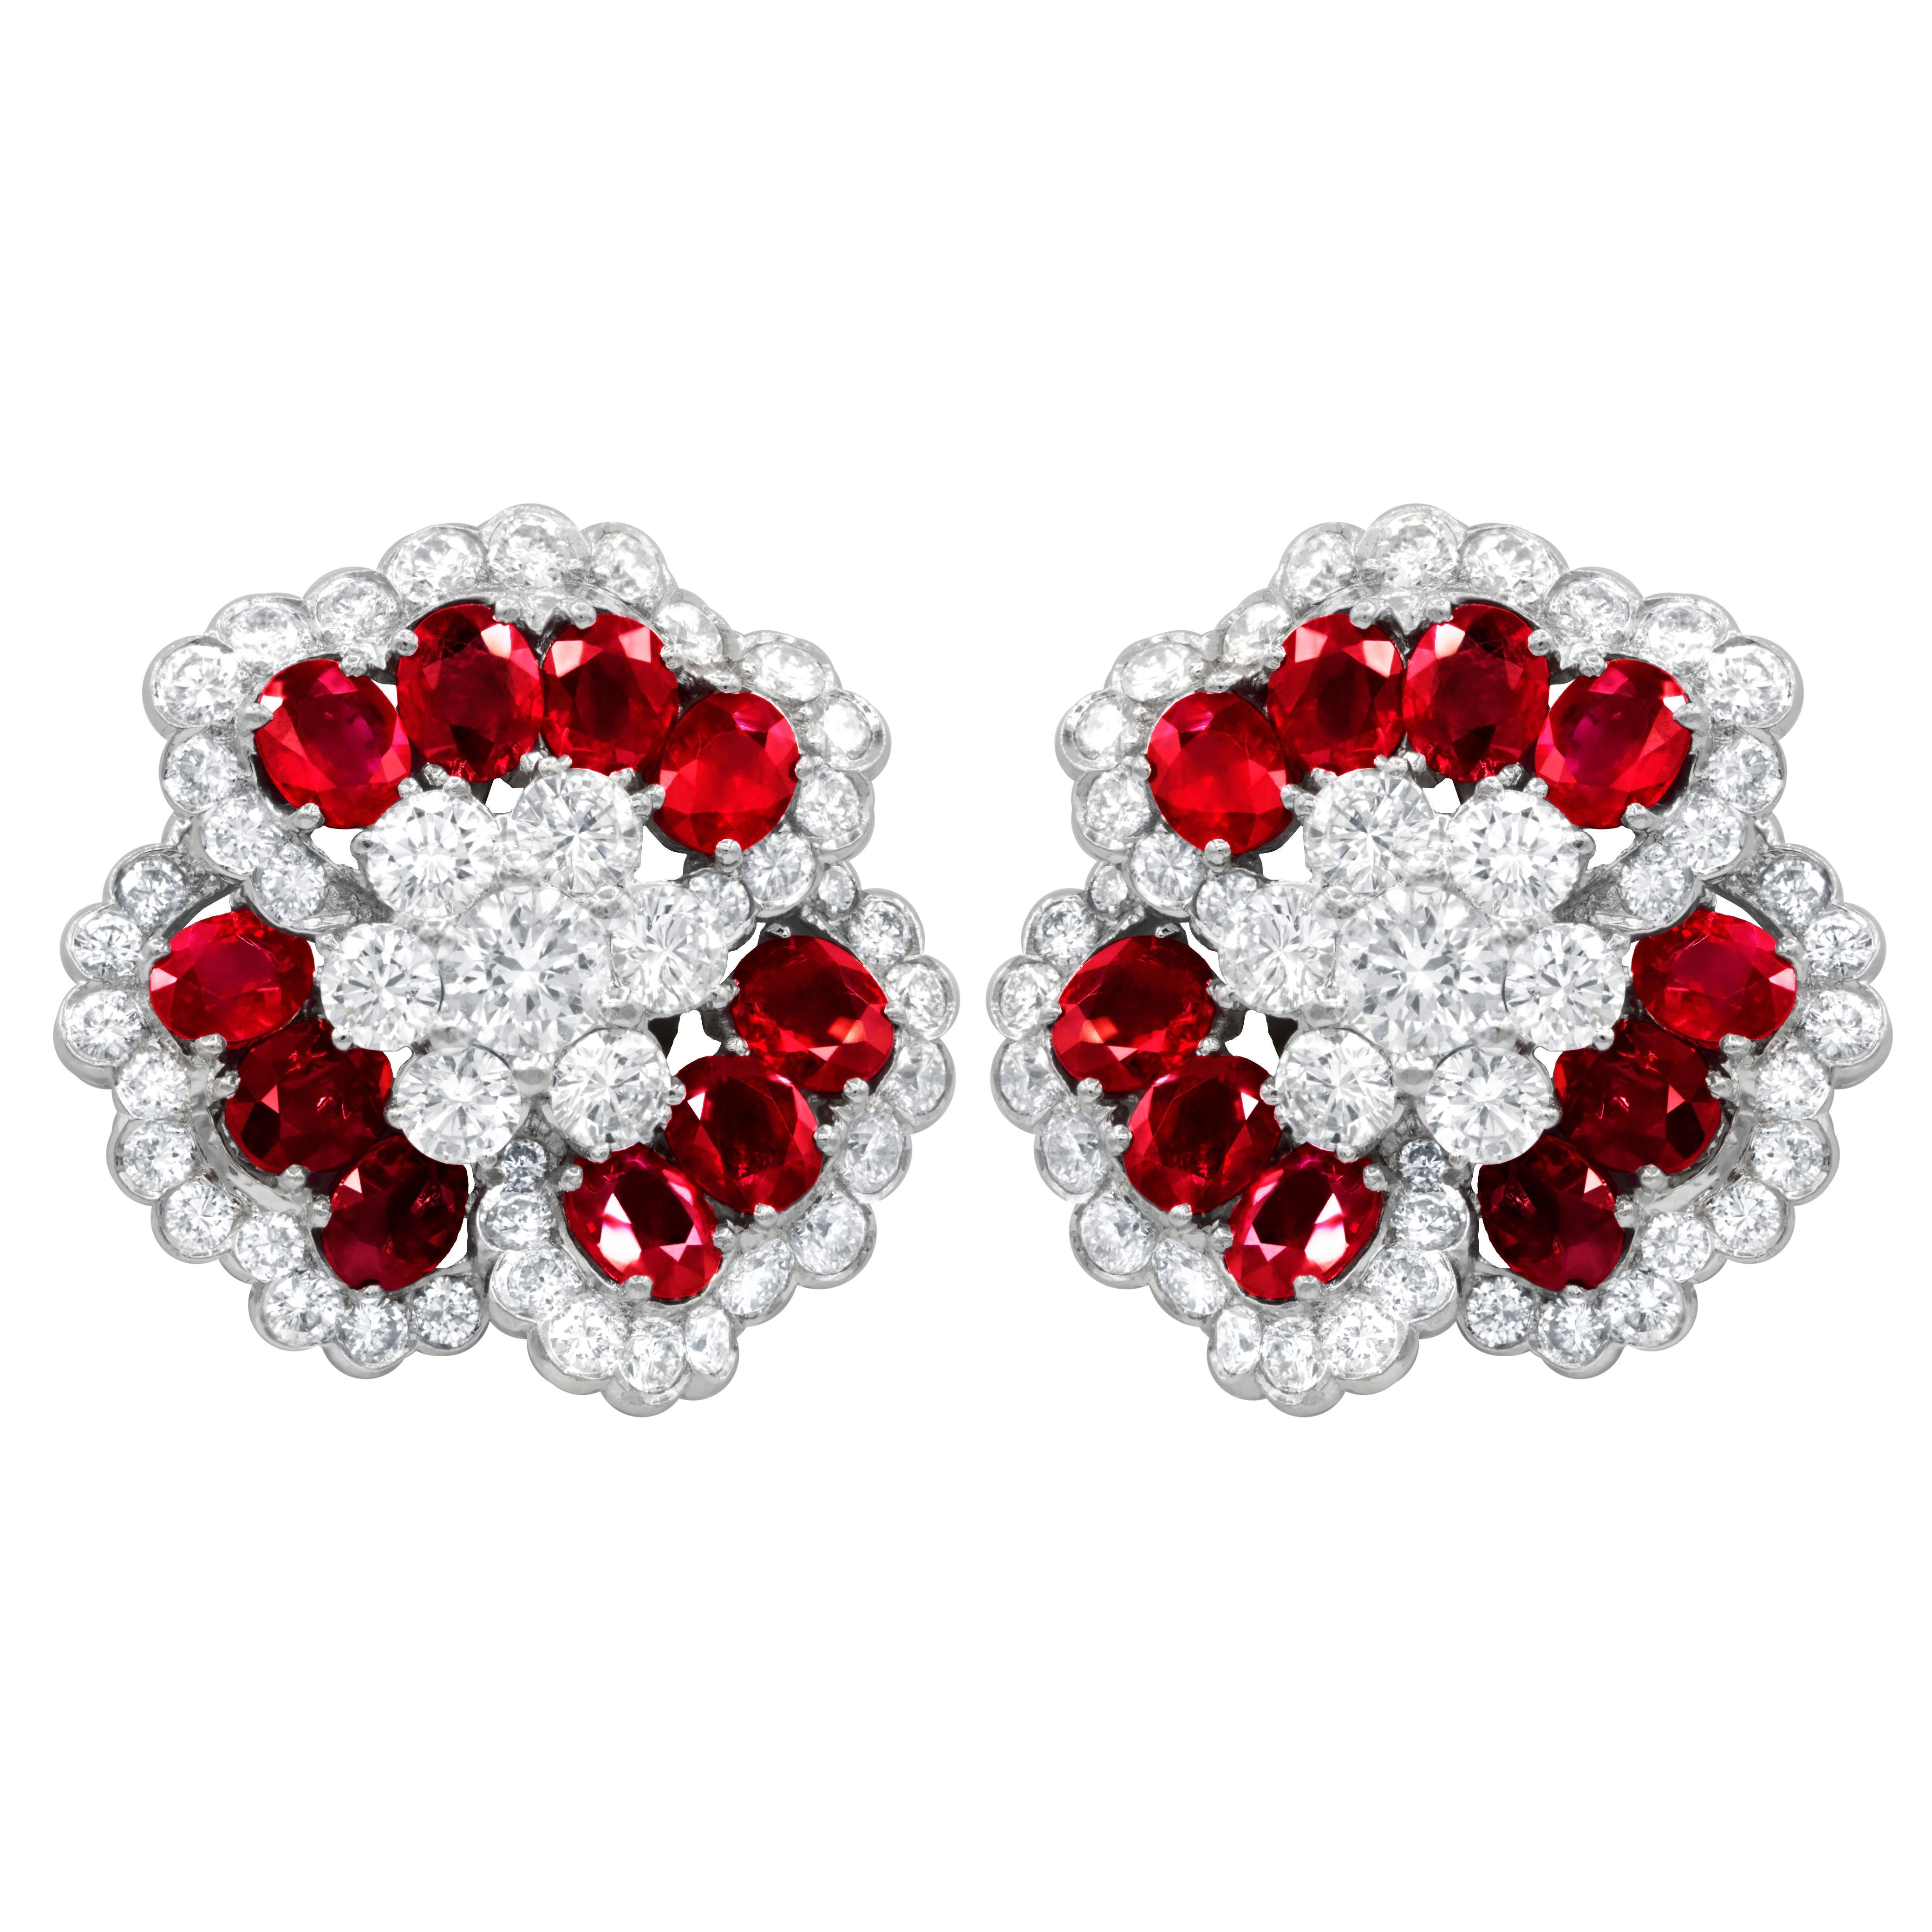 Platinum ruby and diamond earrings part of a set, features 8.00 carats of rubies and 6.00 carats of diamonds
